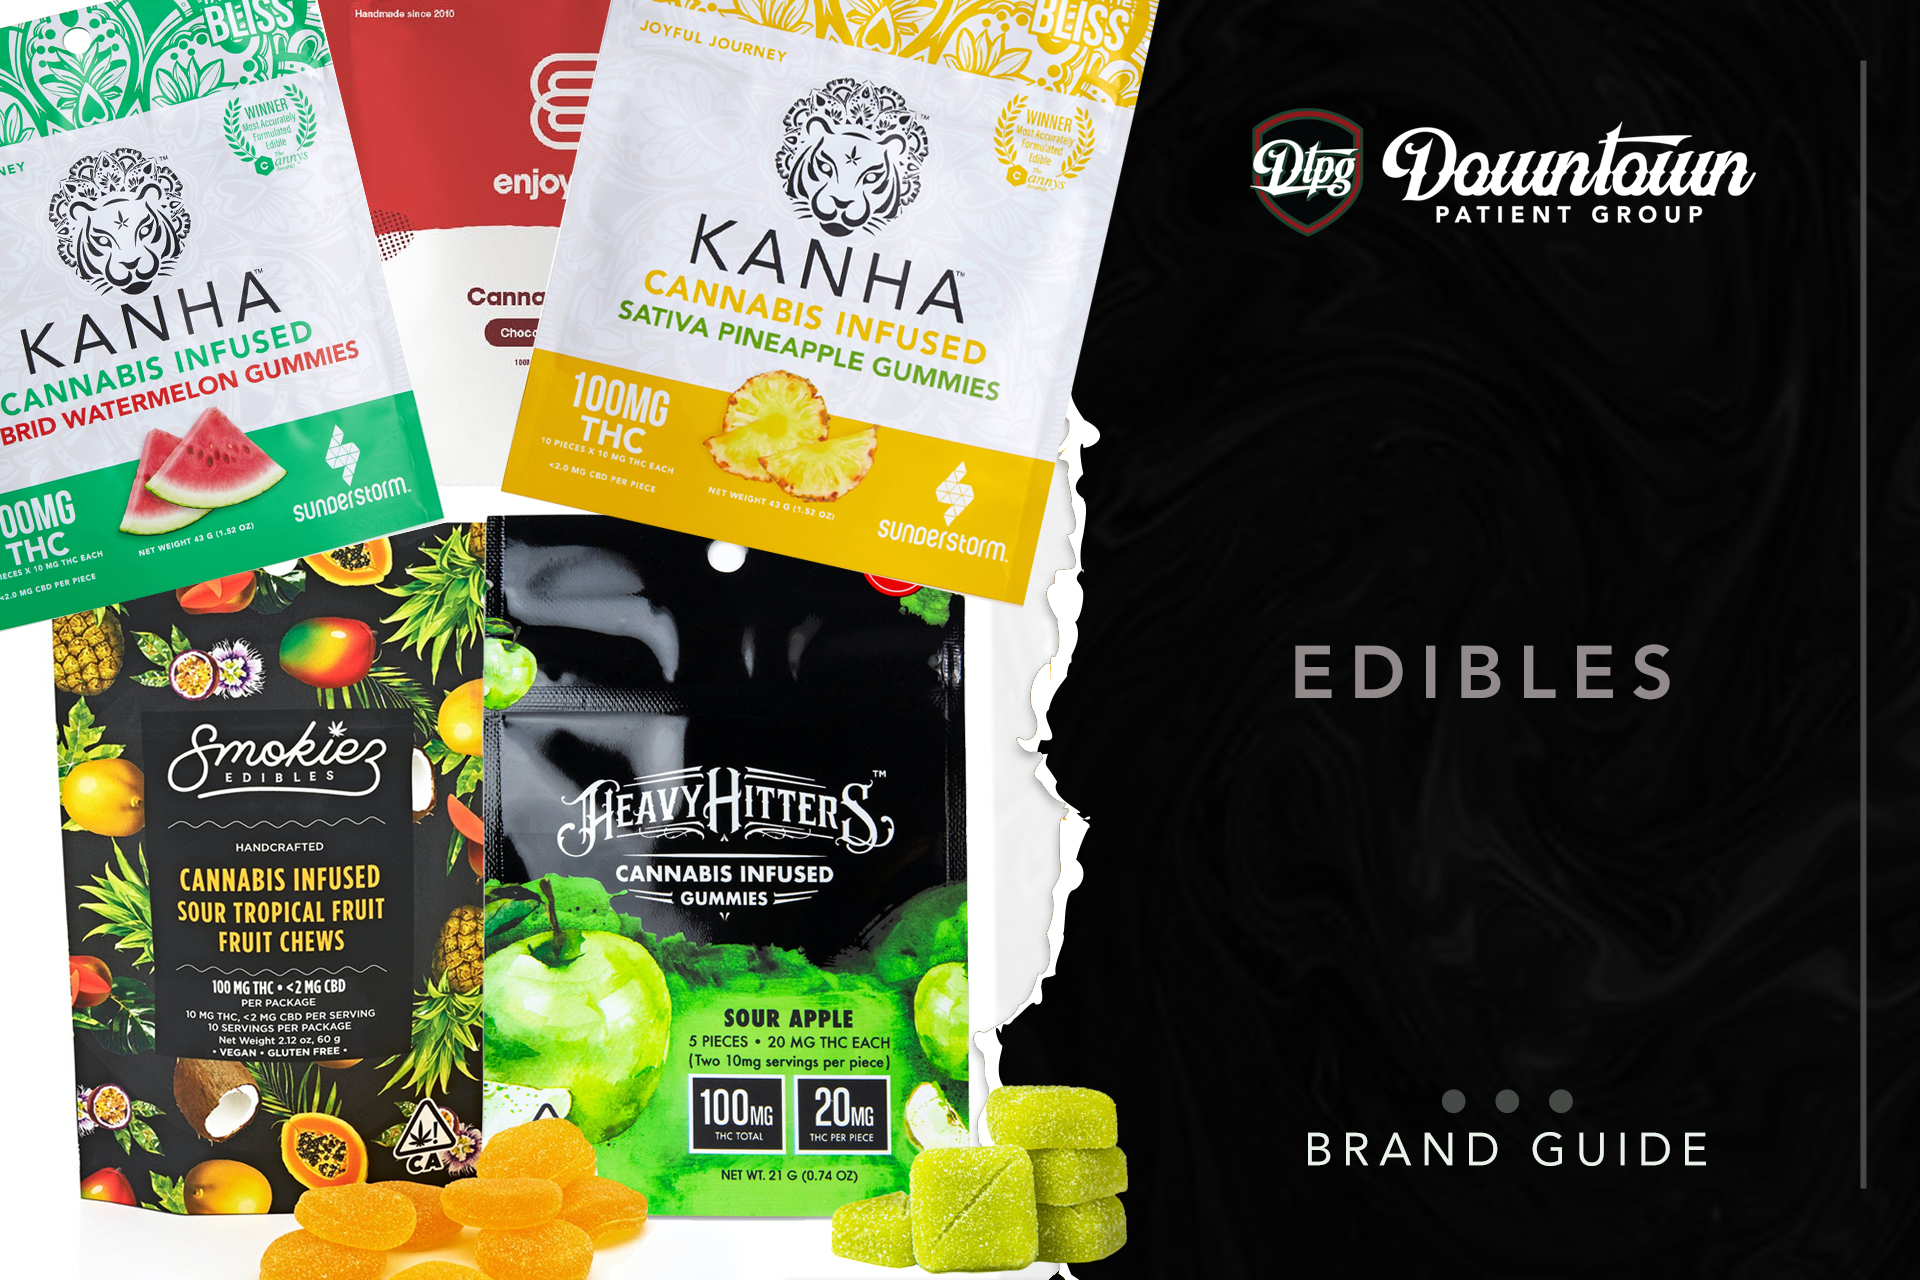 The Complete Guide To Buying Cannabis Edibles At DTPG